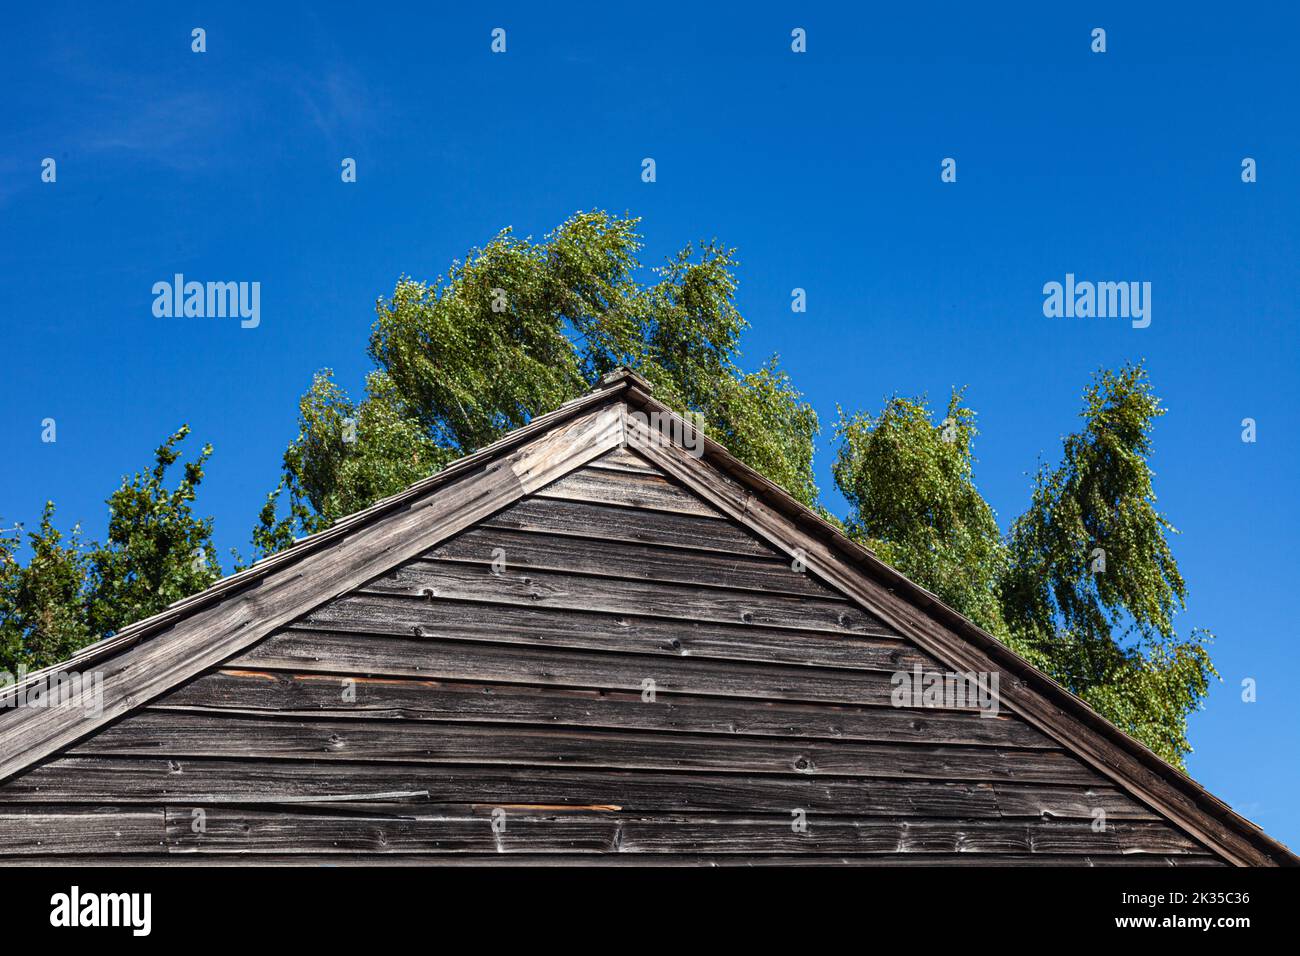 Weathered wooden gable against a blue sky with trees in Steveston British Columbia Canada Stock Photo